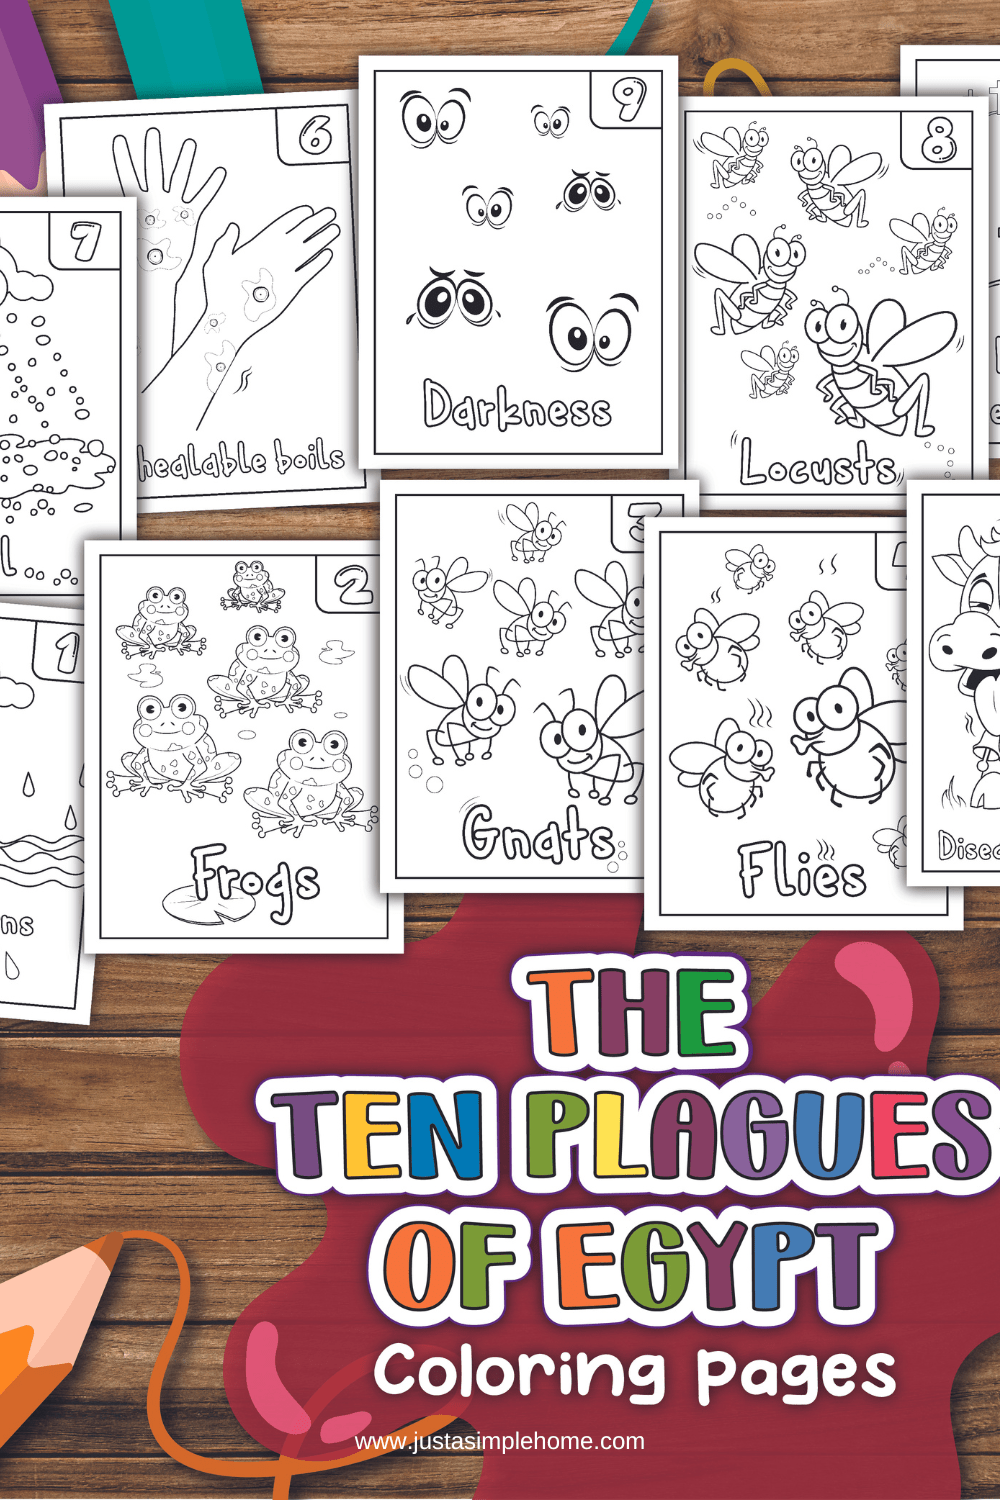 Plagues coloring pack for kids